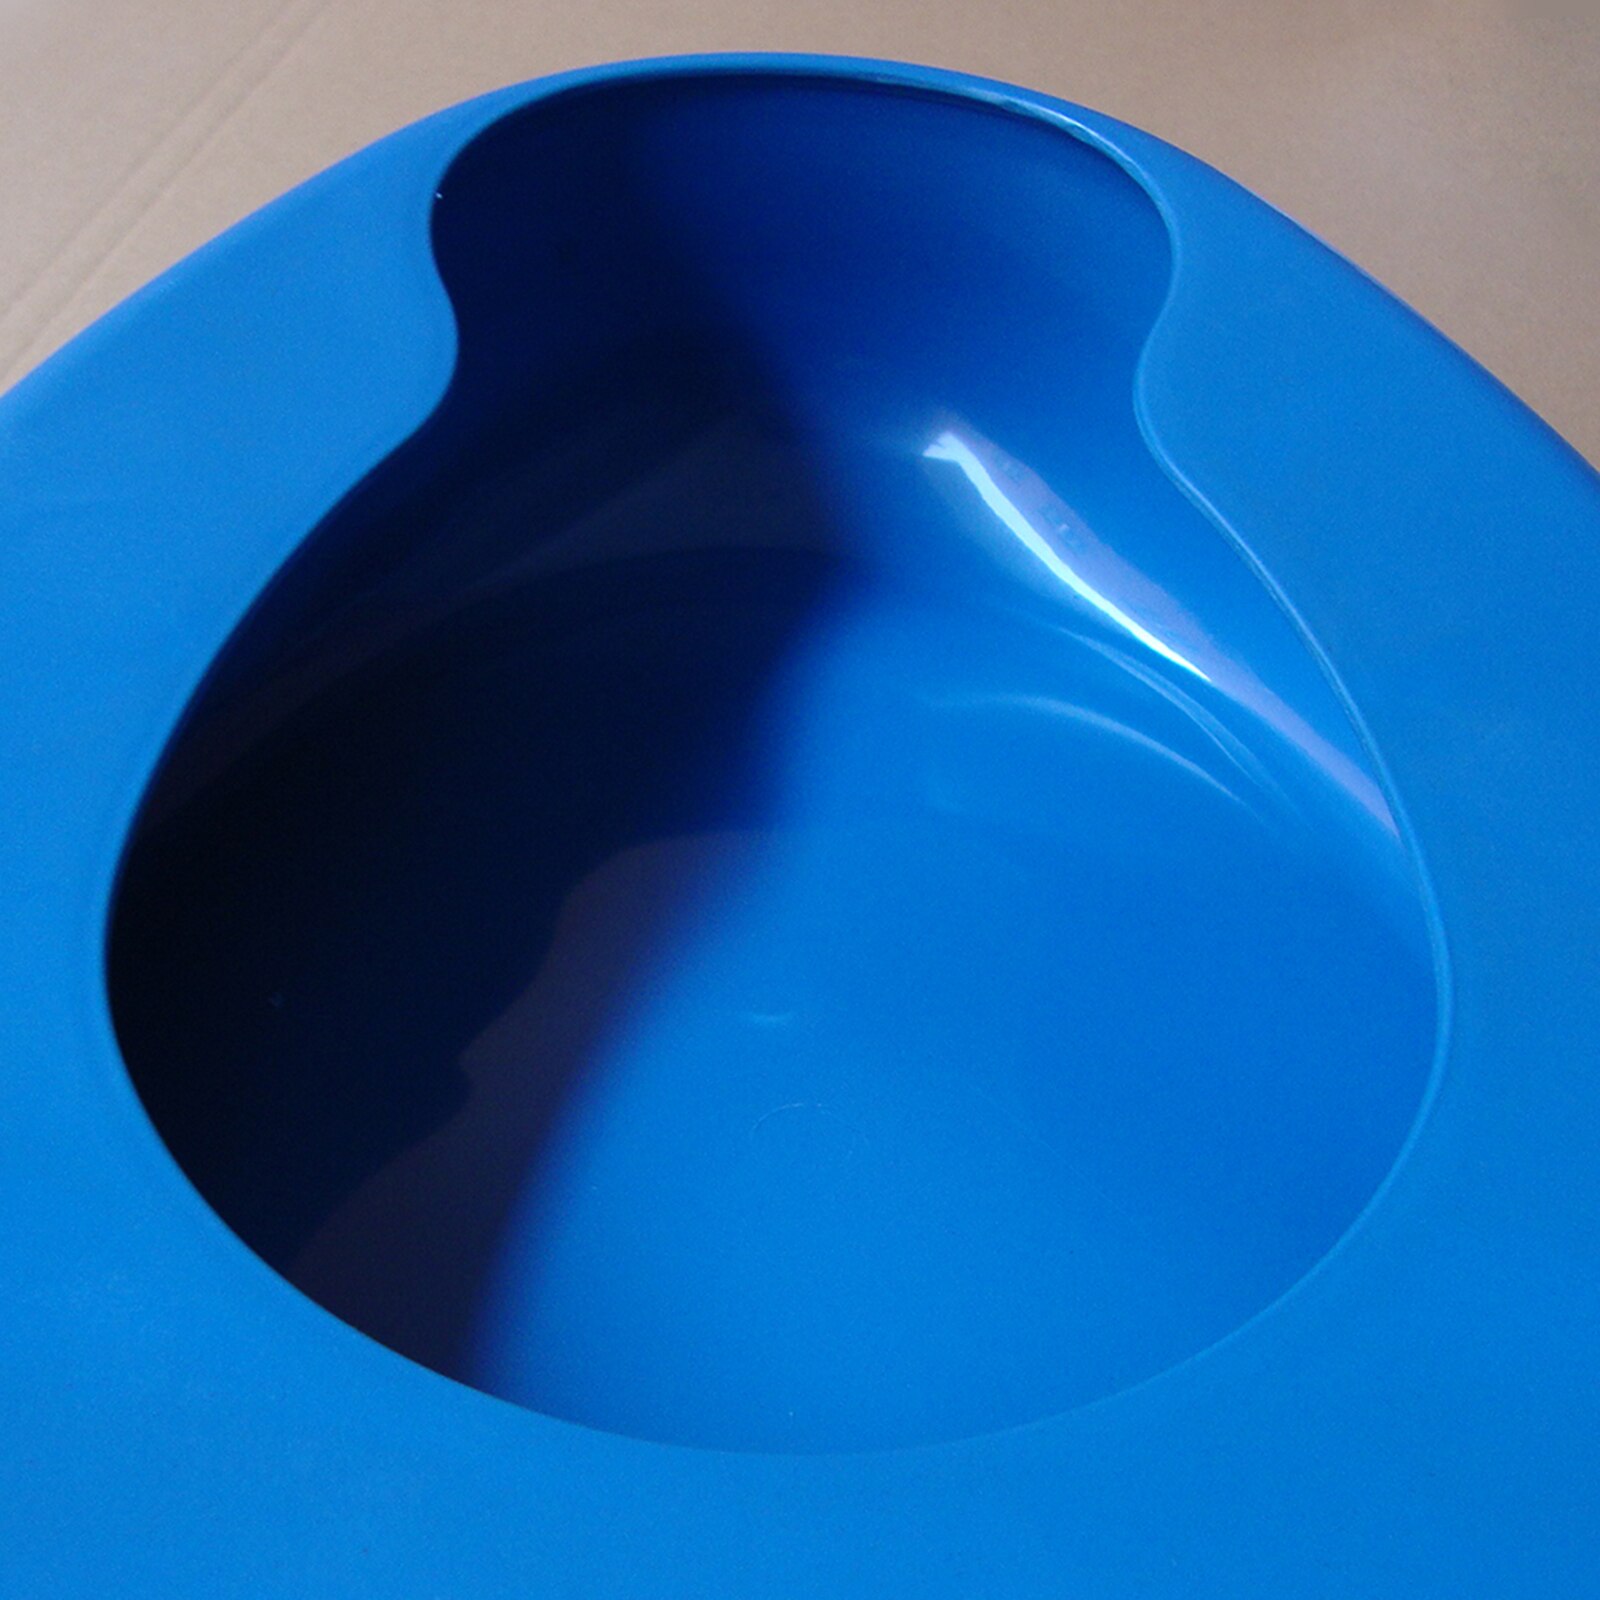 Anti-Spill Blue Bedpan Seat Urinal for Bedridden Patient Elderly Care,Reusable Easy to Clean Patient Home Bed Pan